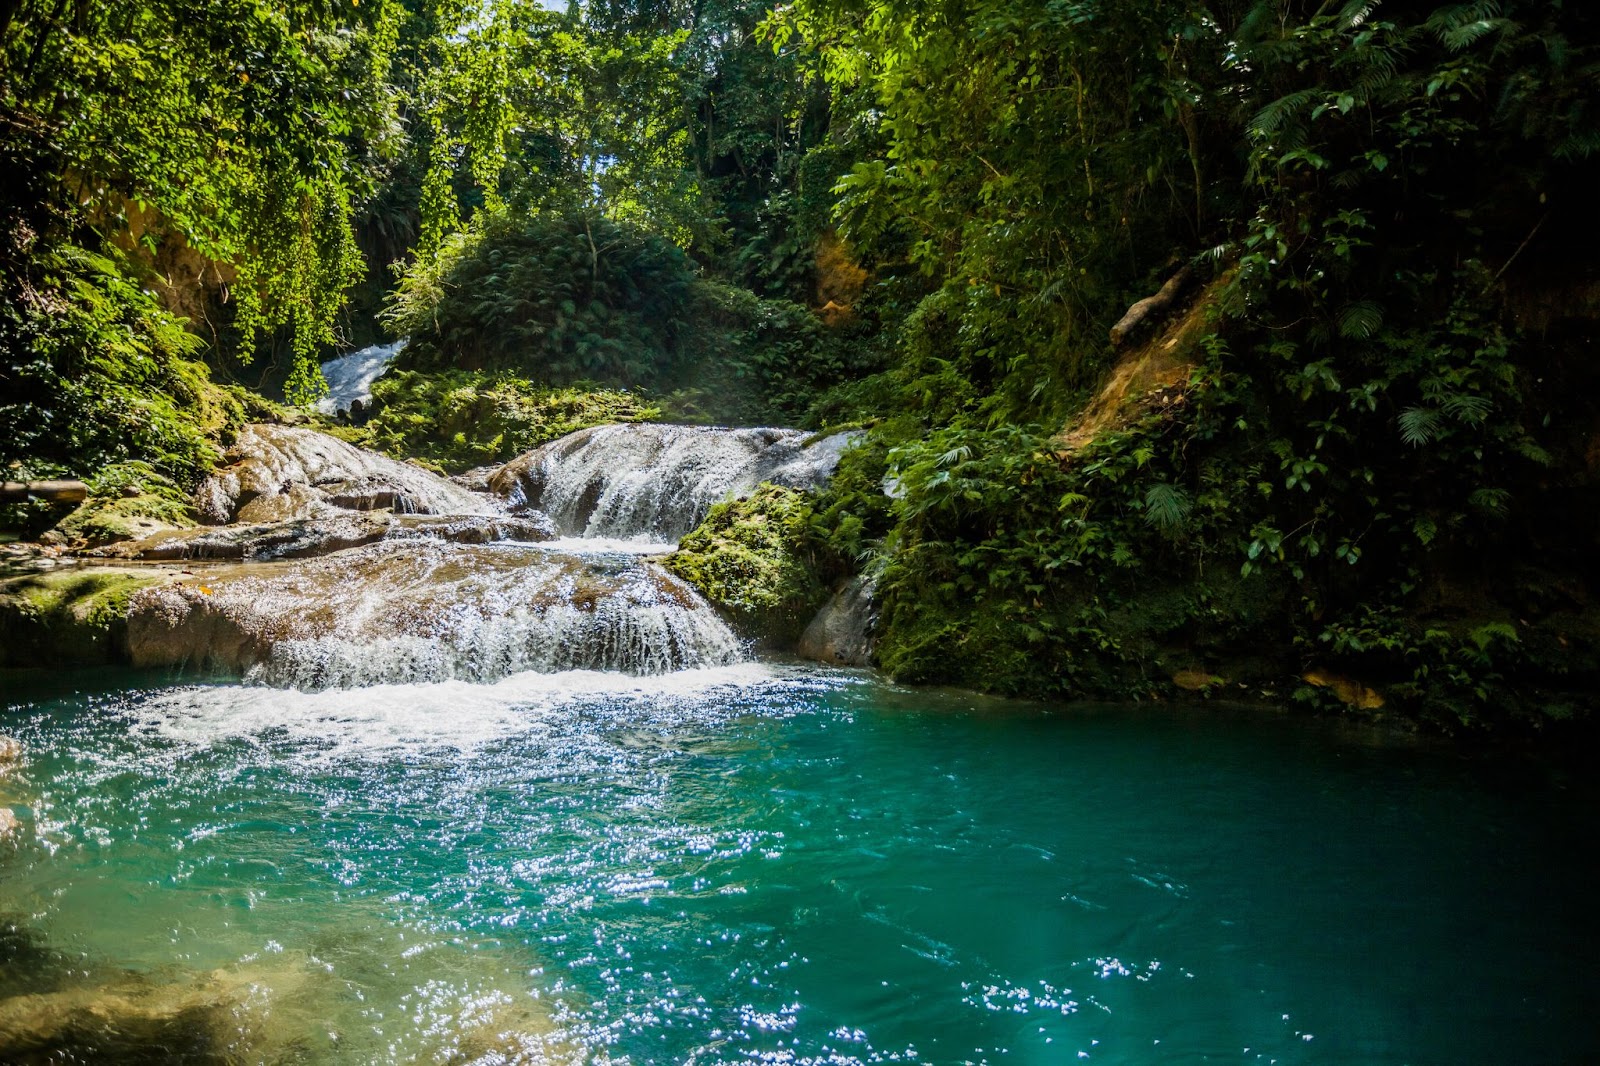 Blue Hole in Jamaica